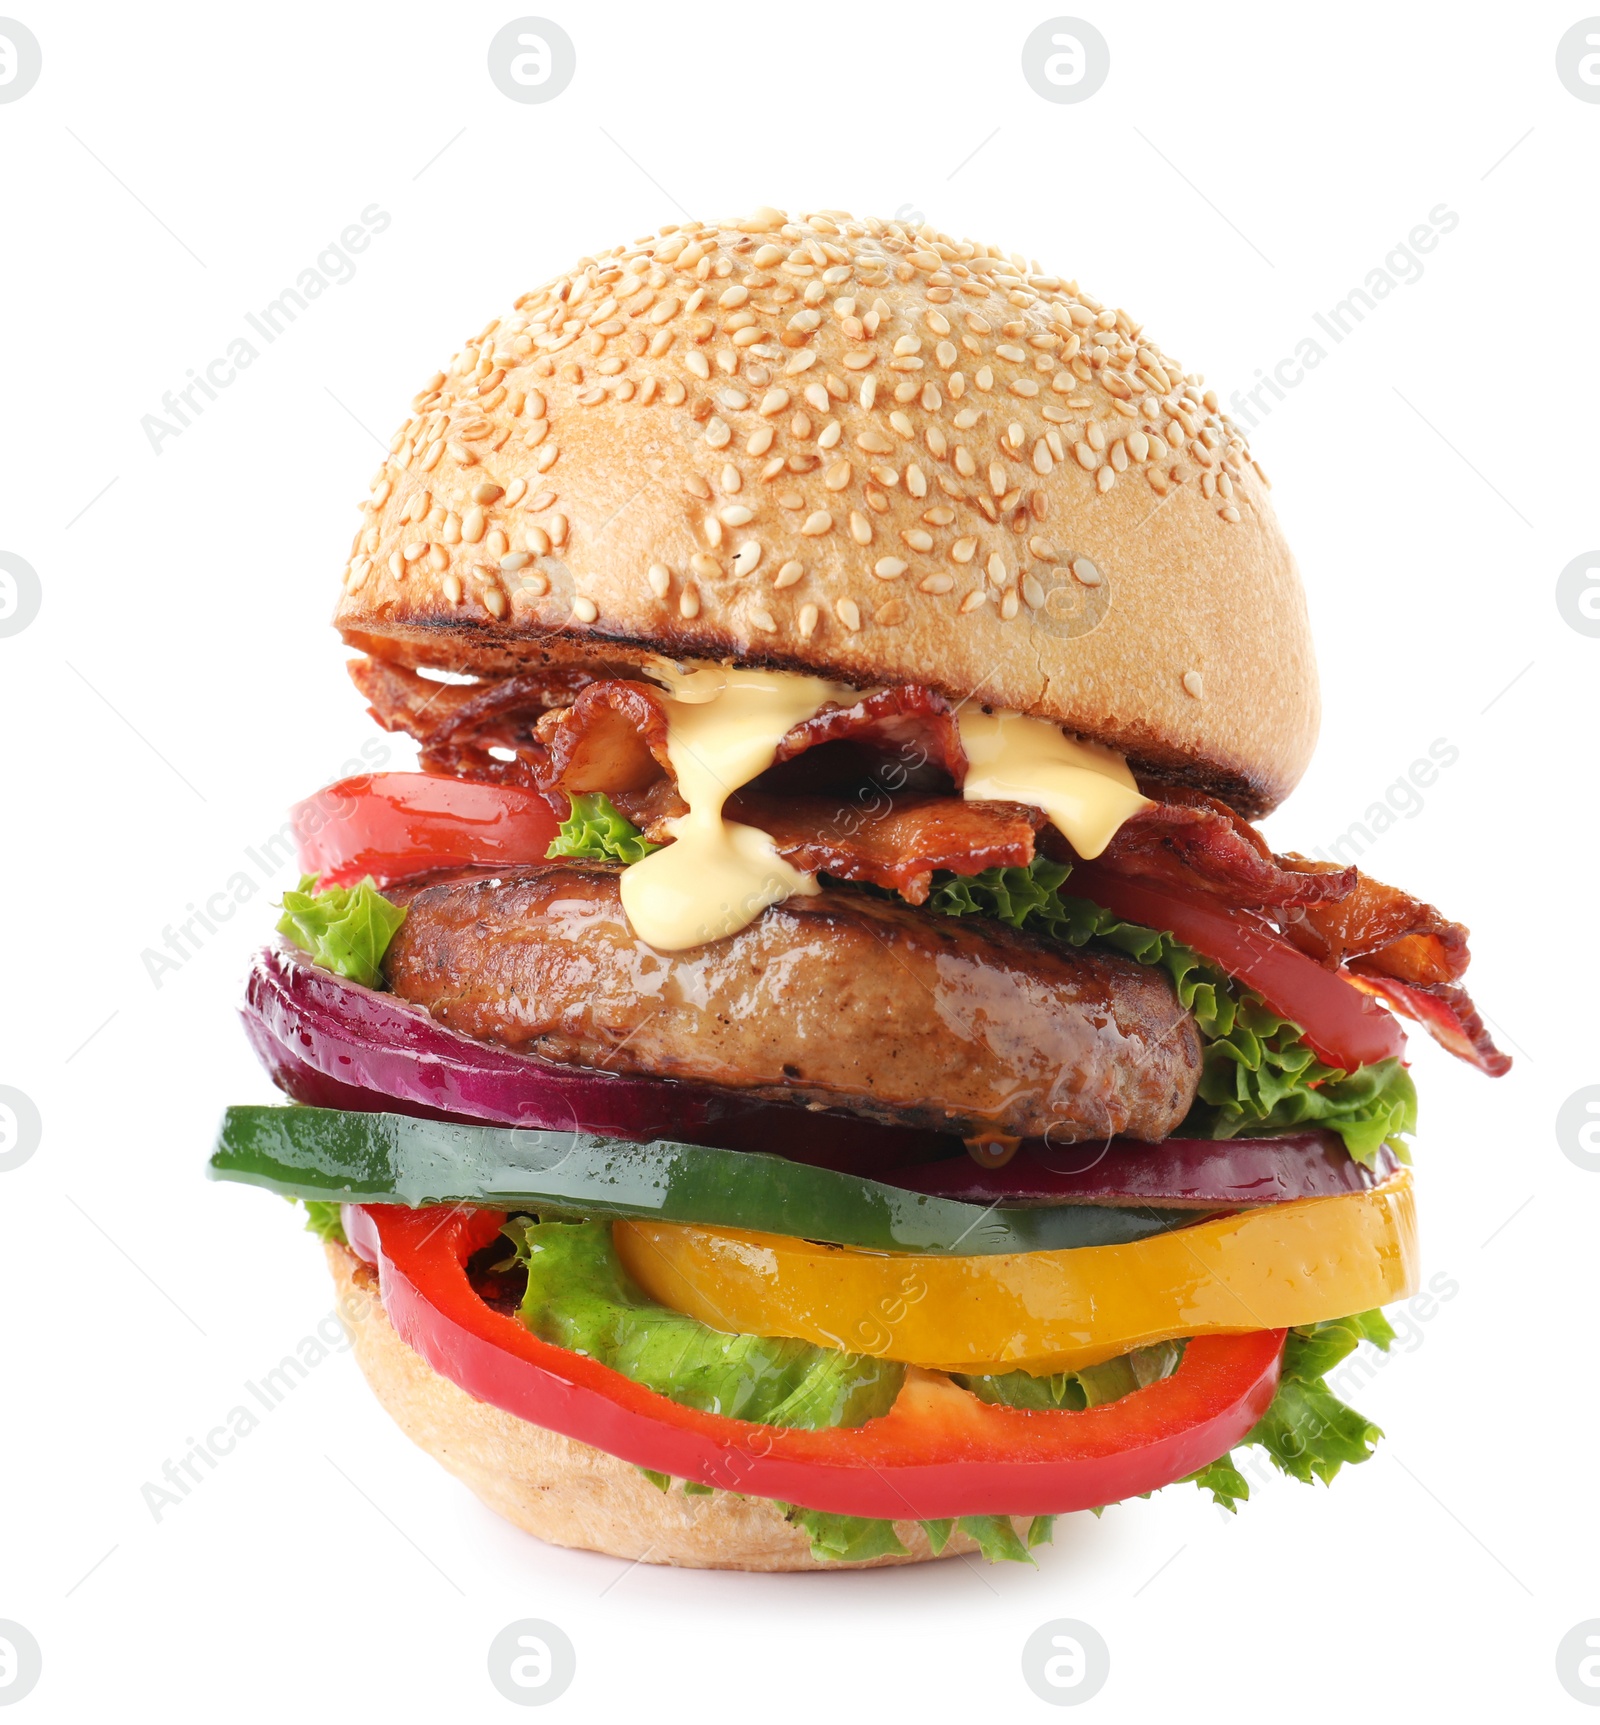 Image of Tasty burger with bacon on white background